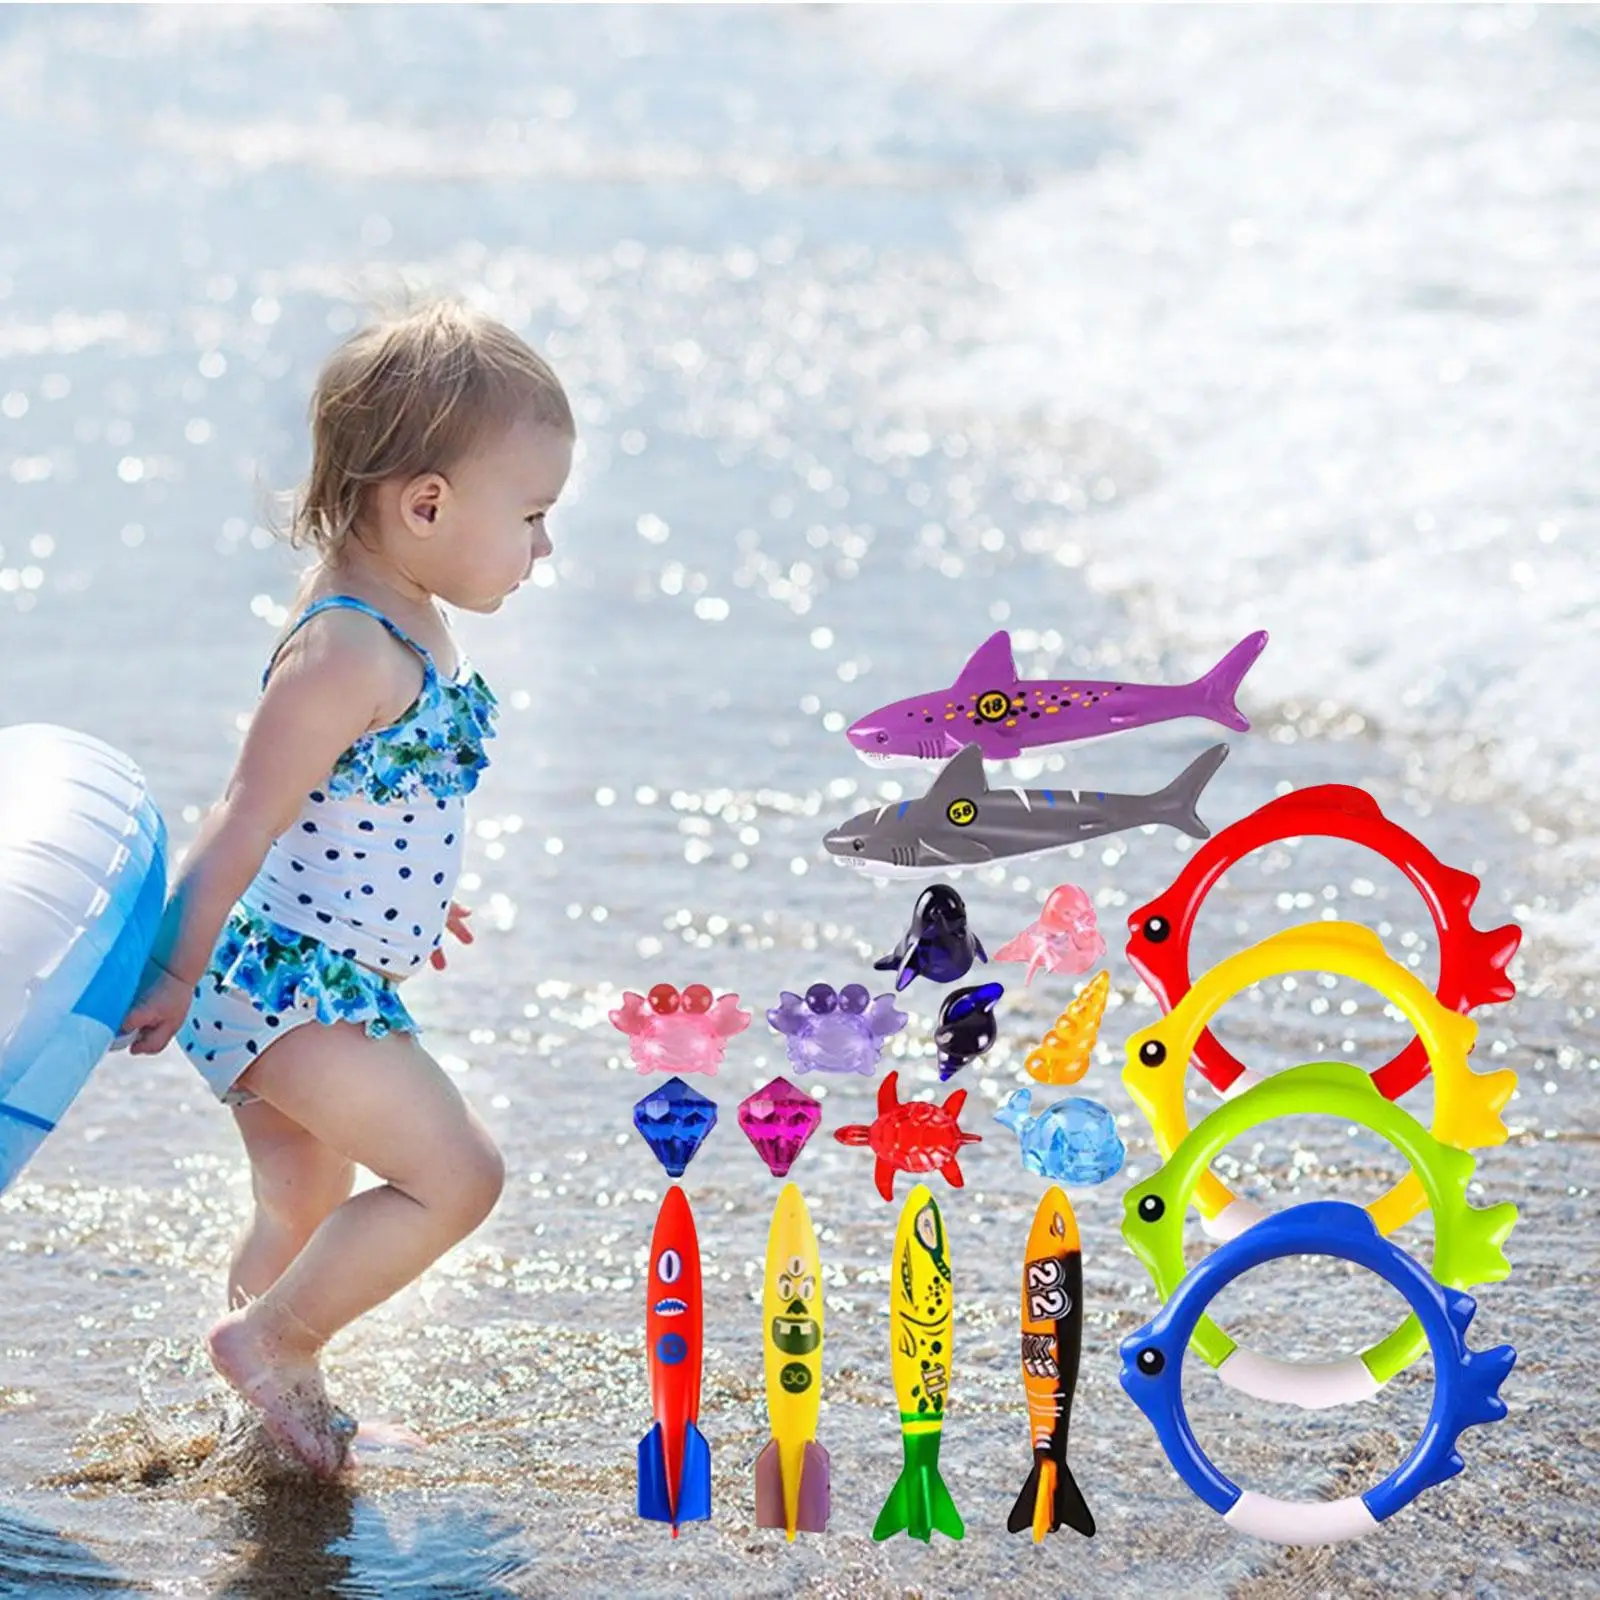 20x Diving Toys Party Favors Gems Underwater Dive Gifts Fun Swim Games Sinking Set for Pool Schools Beach Boys Girls